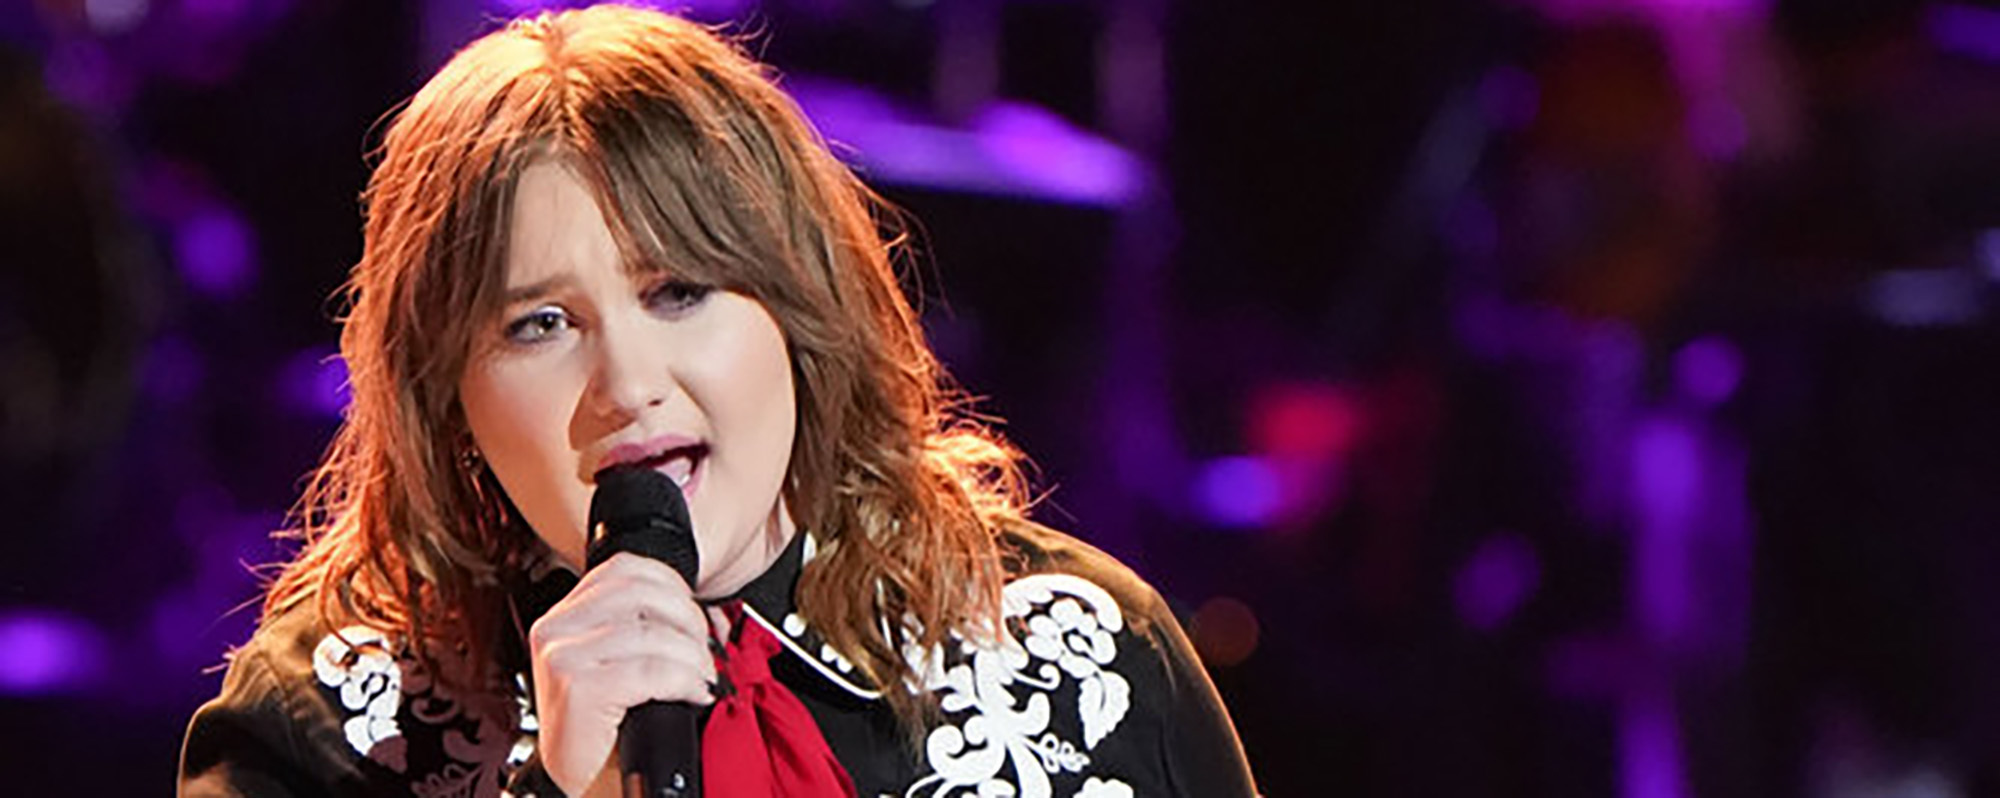 Watch: ‘The Voice’ Contestant Ruby Leigh Yodels Her Way to a Knockout Win with a Stunning Rendition of LeAnn Rimes’ “Blue”